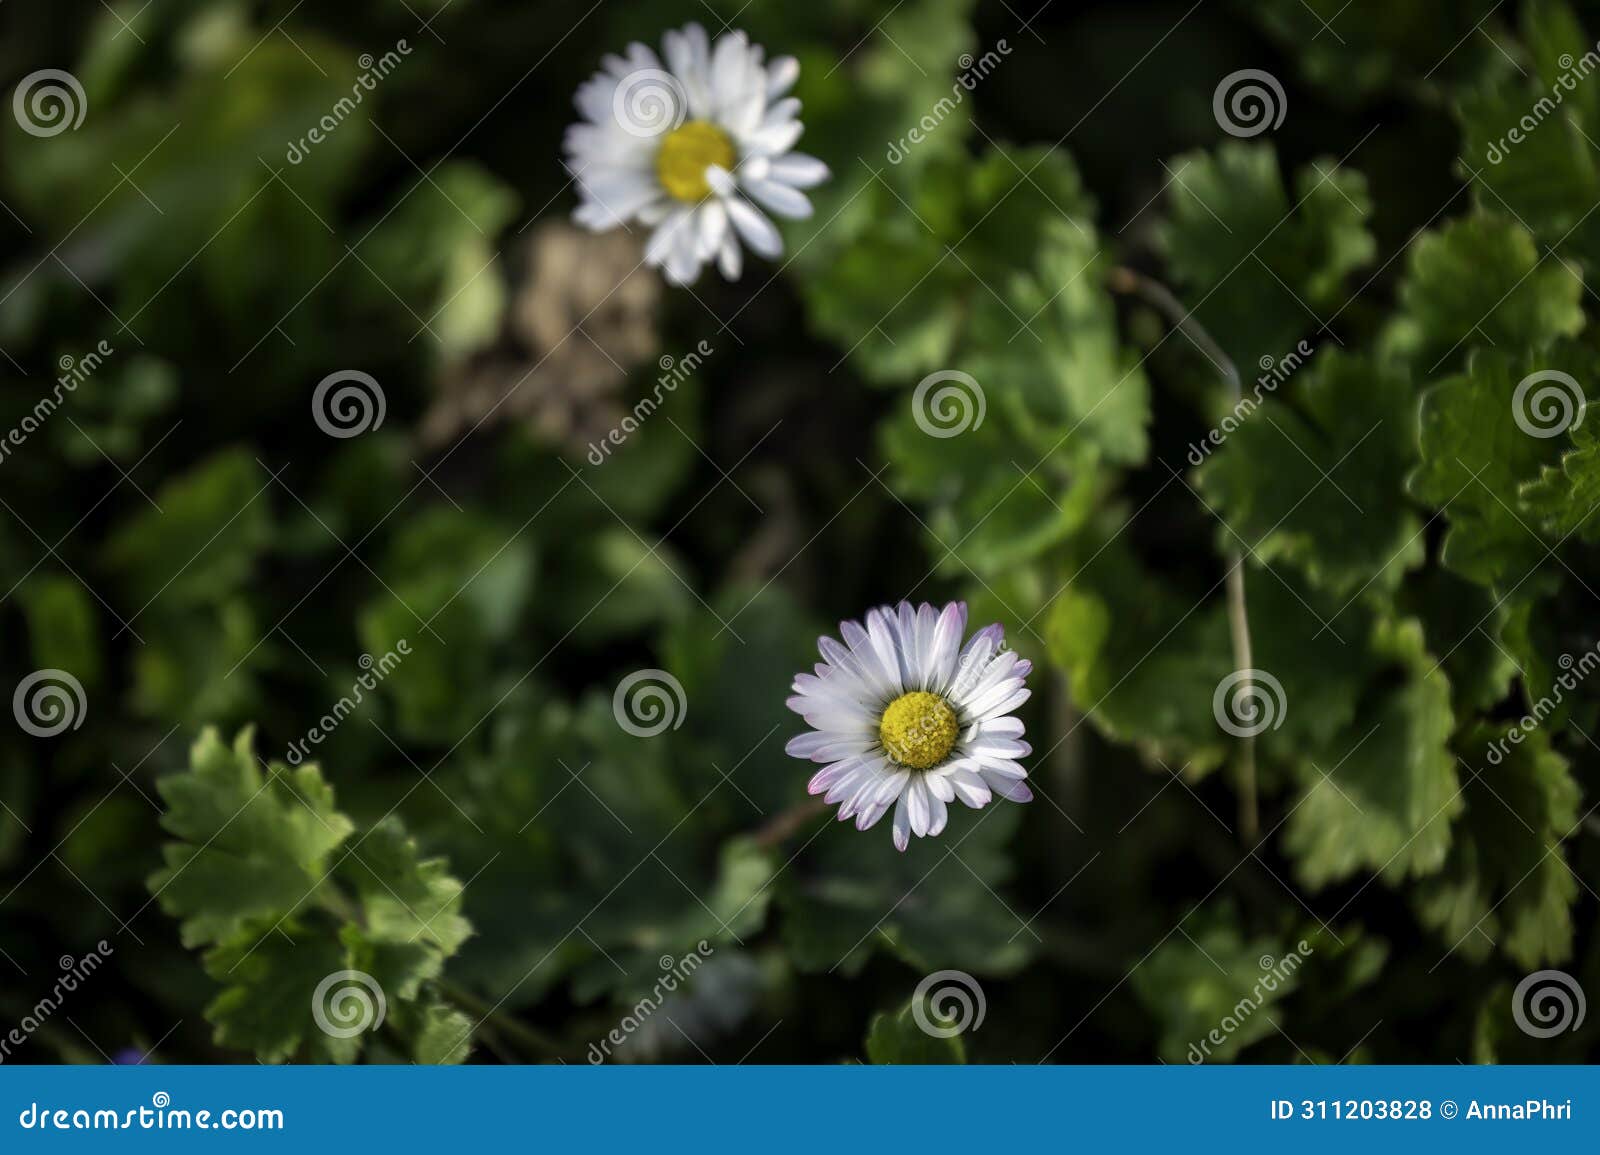 two daisies, spring mood, happyness